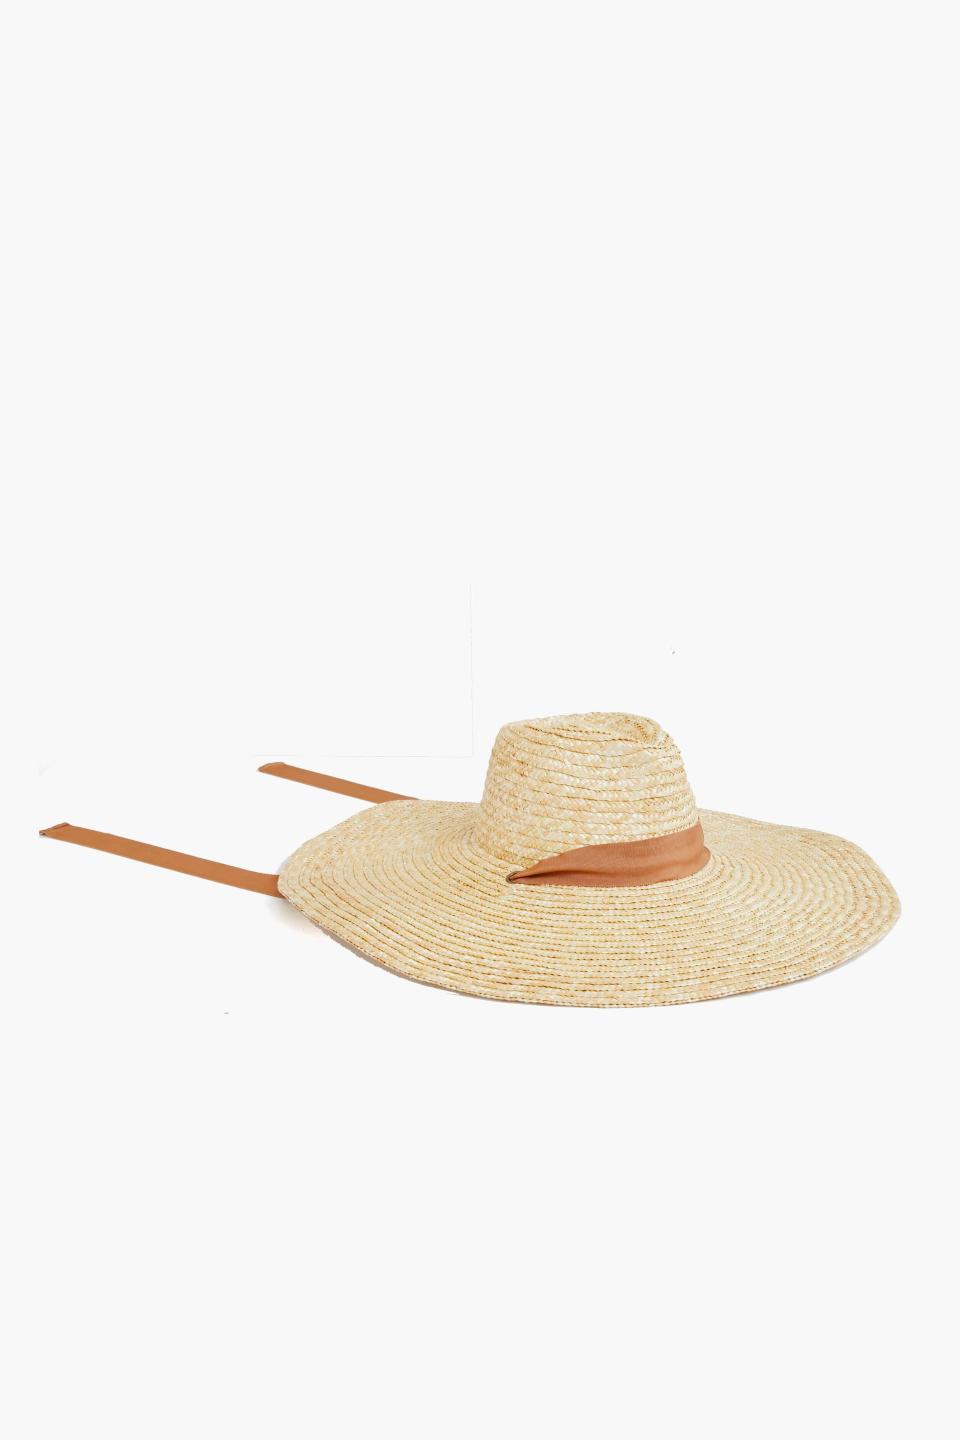 8) A Cool Hat to Block the Texas Sun